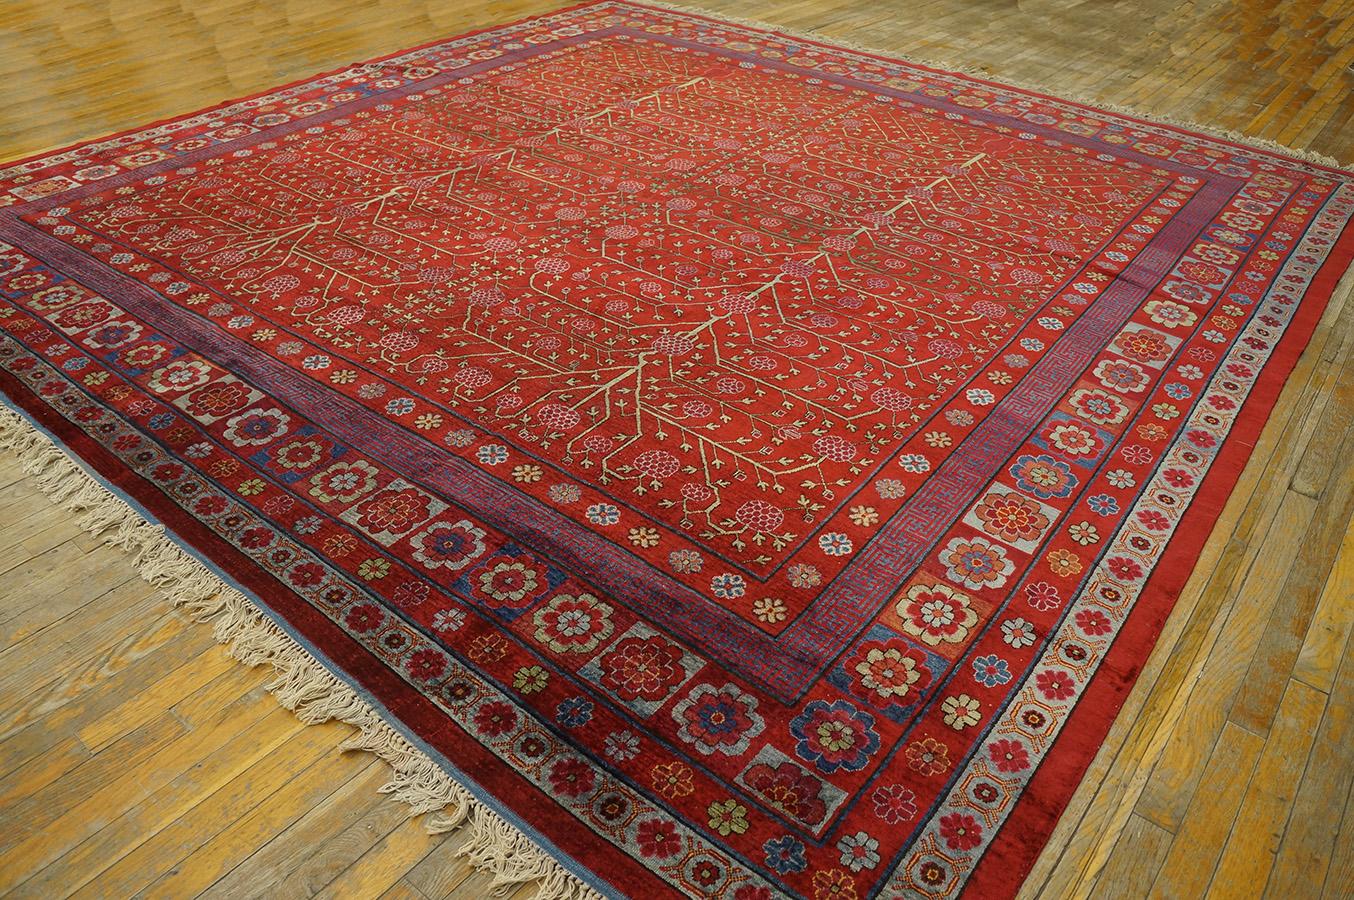 Early 19th Century Central Asian Chinese Khotan Silk Carpet For Sale 4